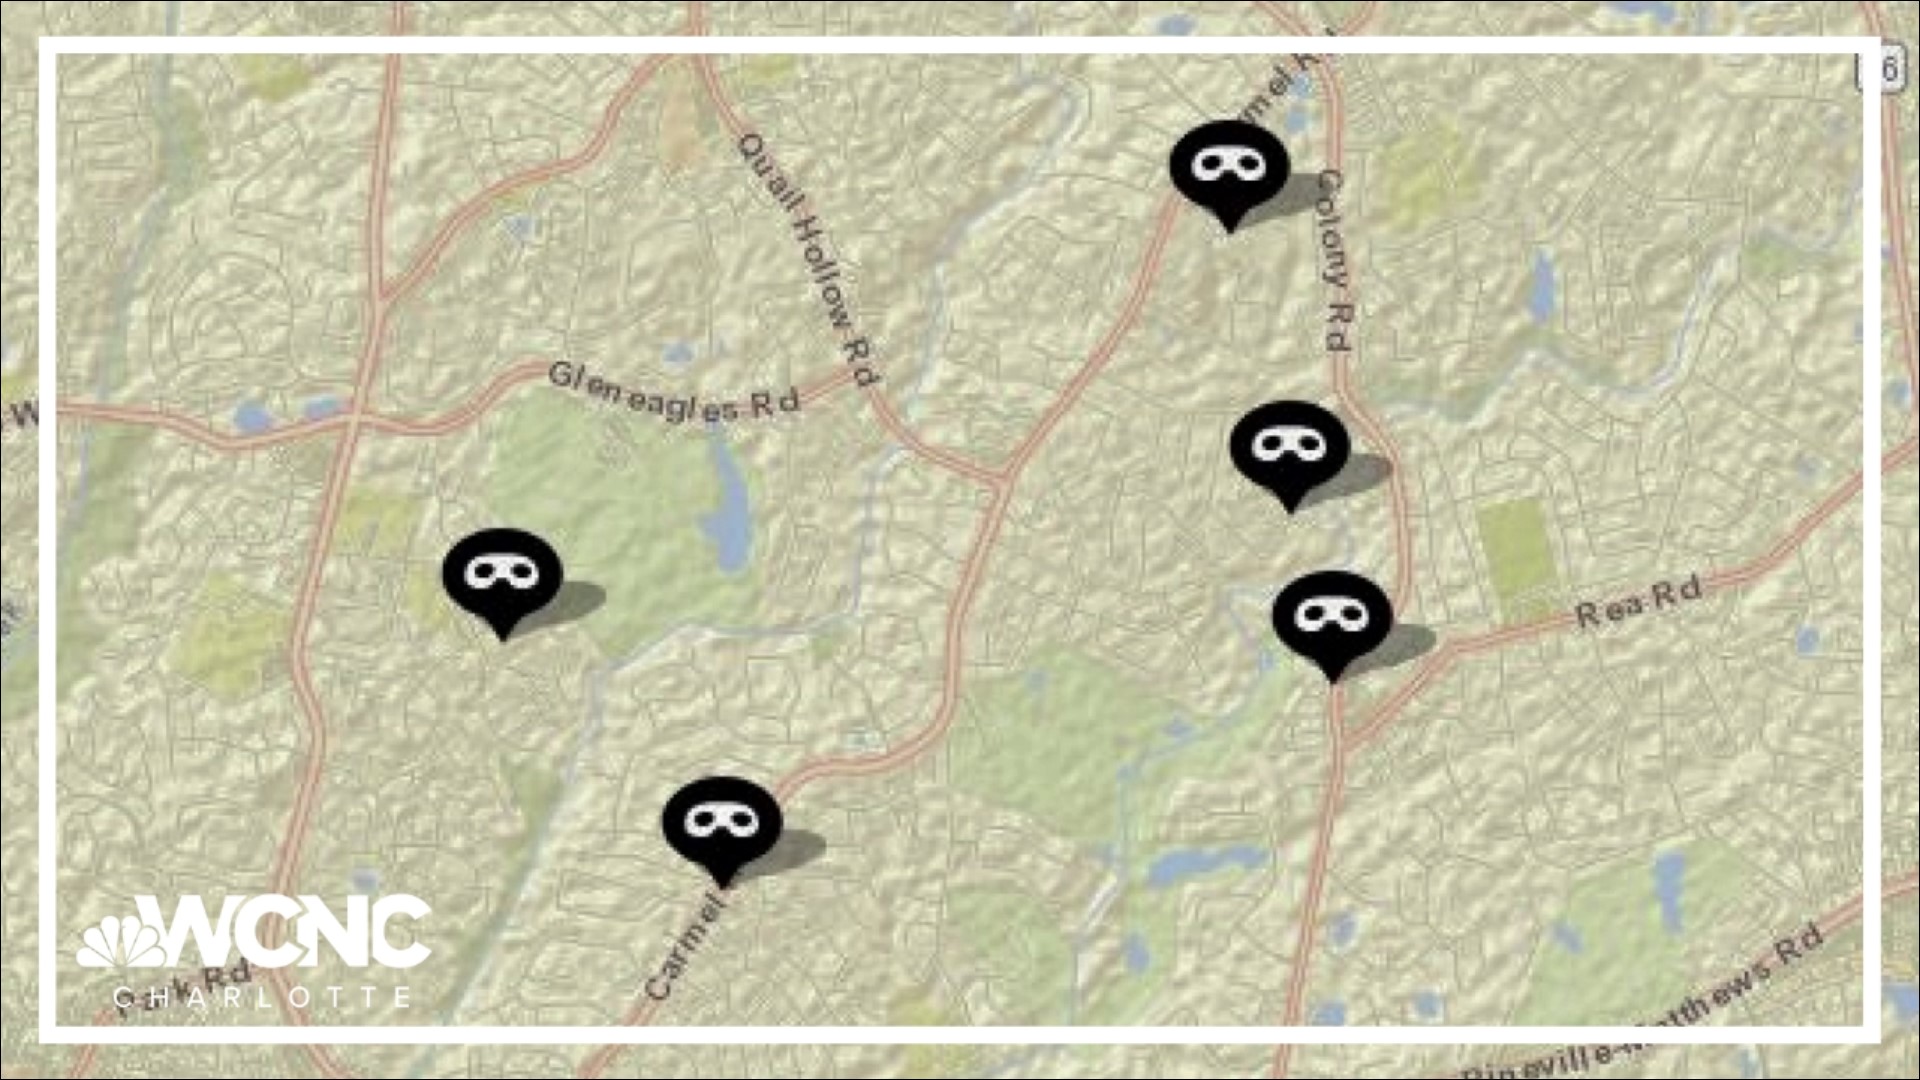 Over the weekend, a string of reported burglaries hit south Charlotte around the Carmel and Montibello neighborhoods.